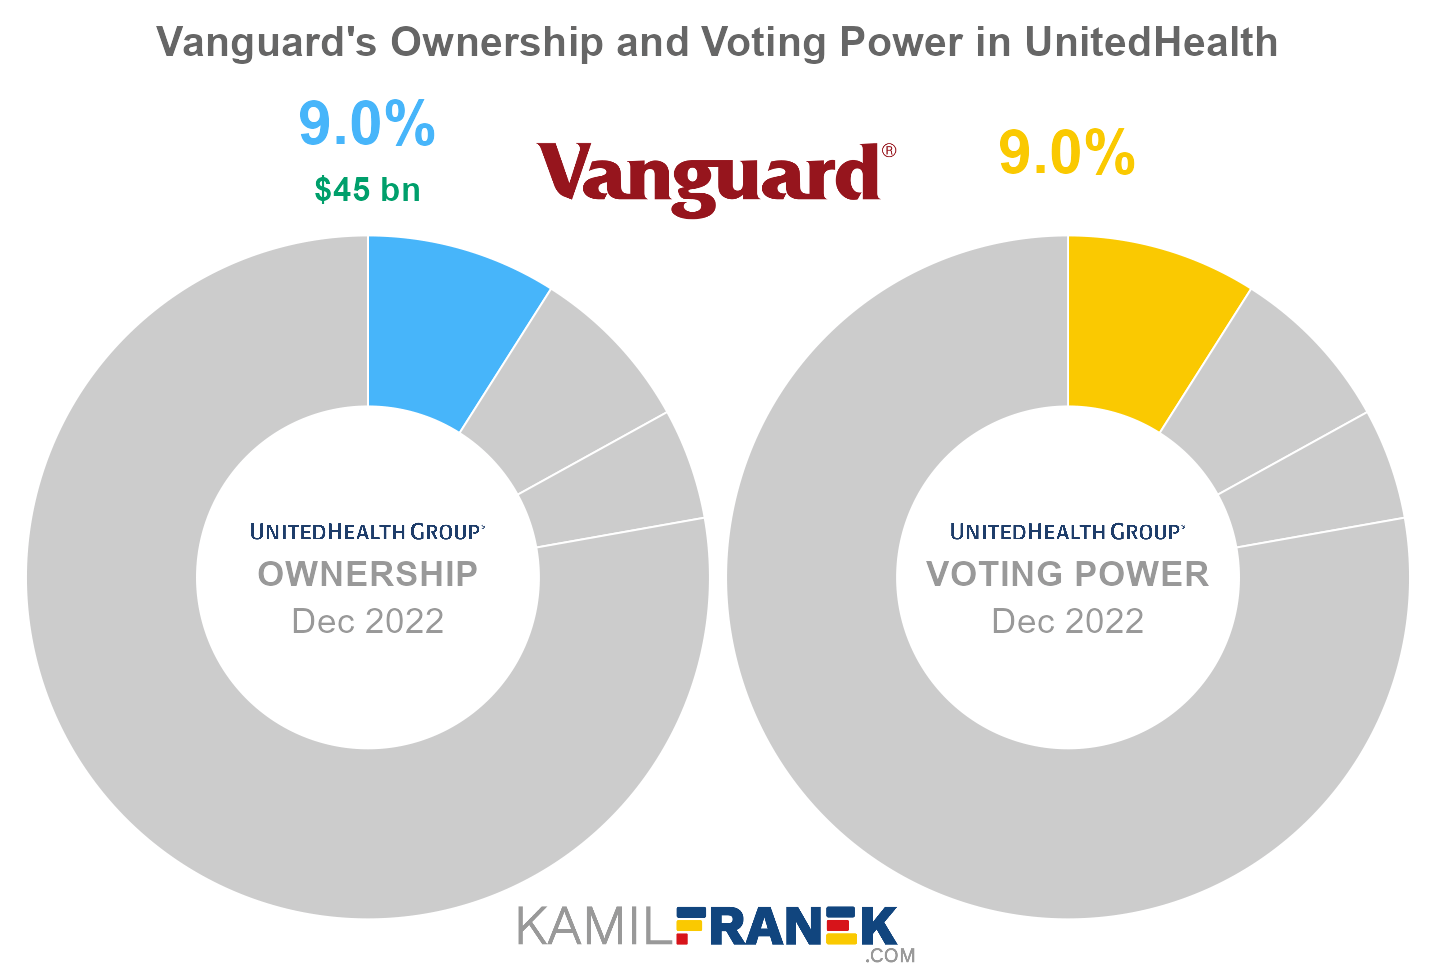 Vanguard's share ownership and voting power in UnitedHealth (chart)